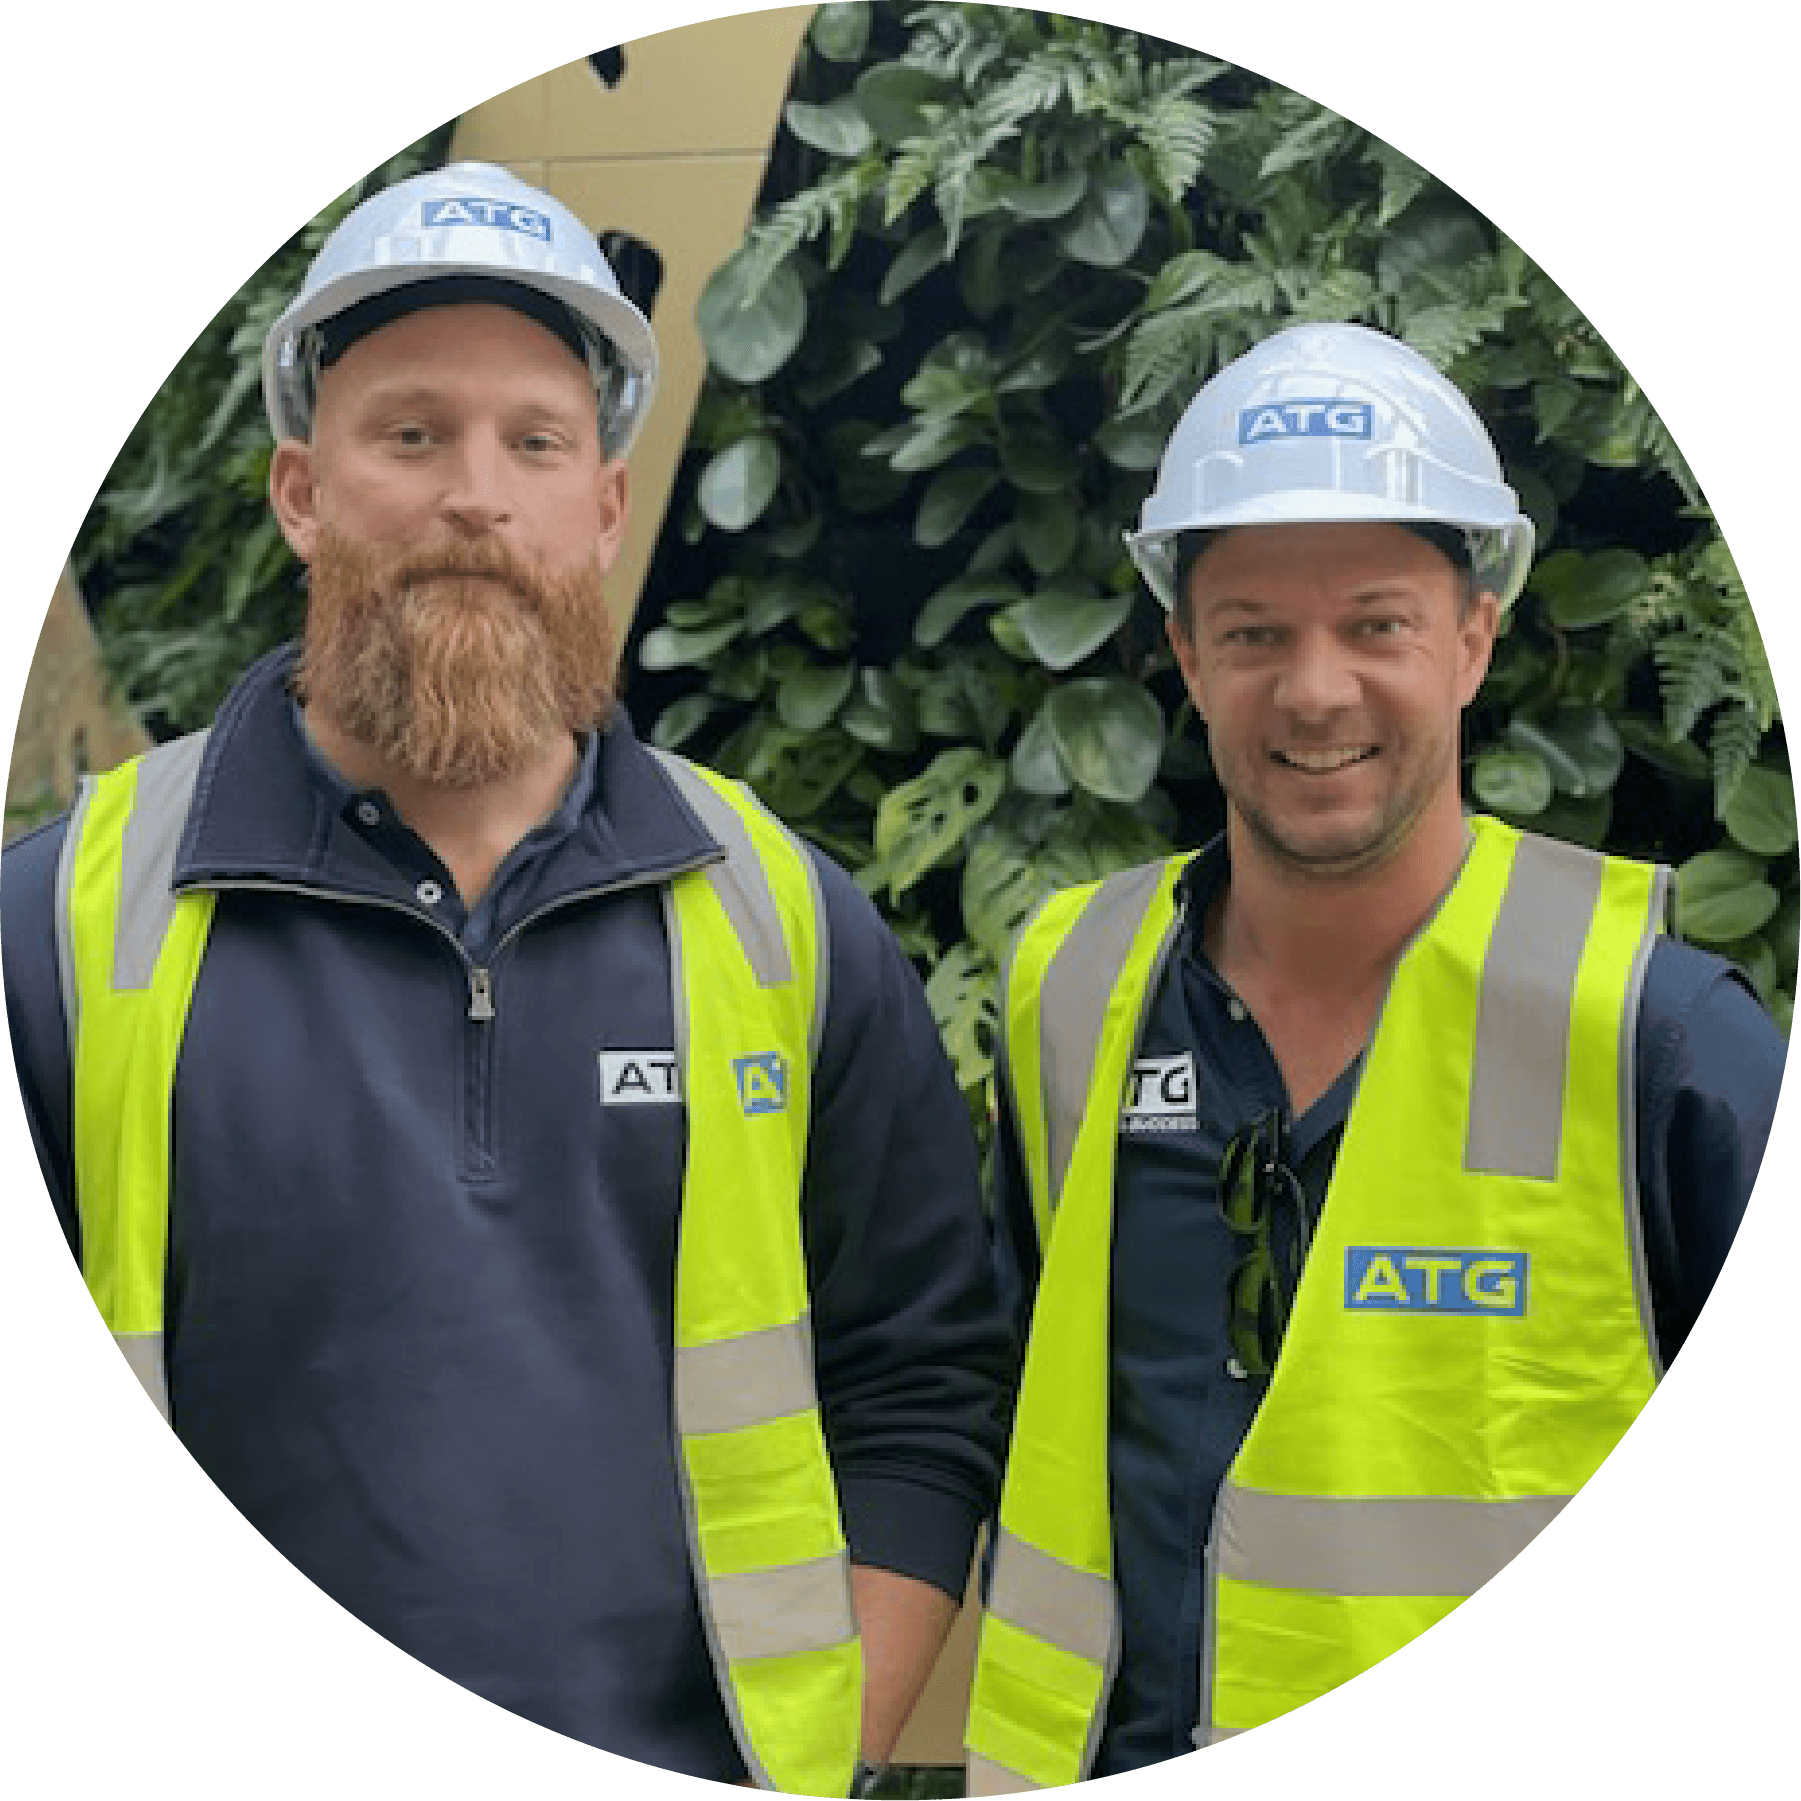 Post Office Square | The People of Post Office Square ATG Group – Builders